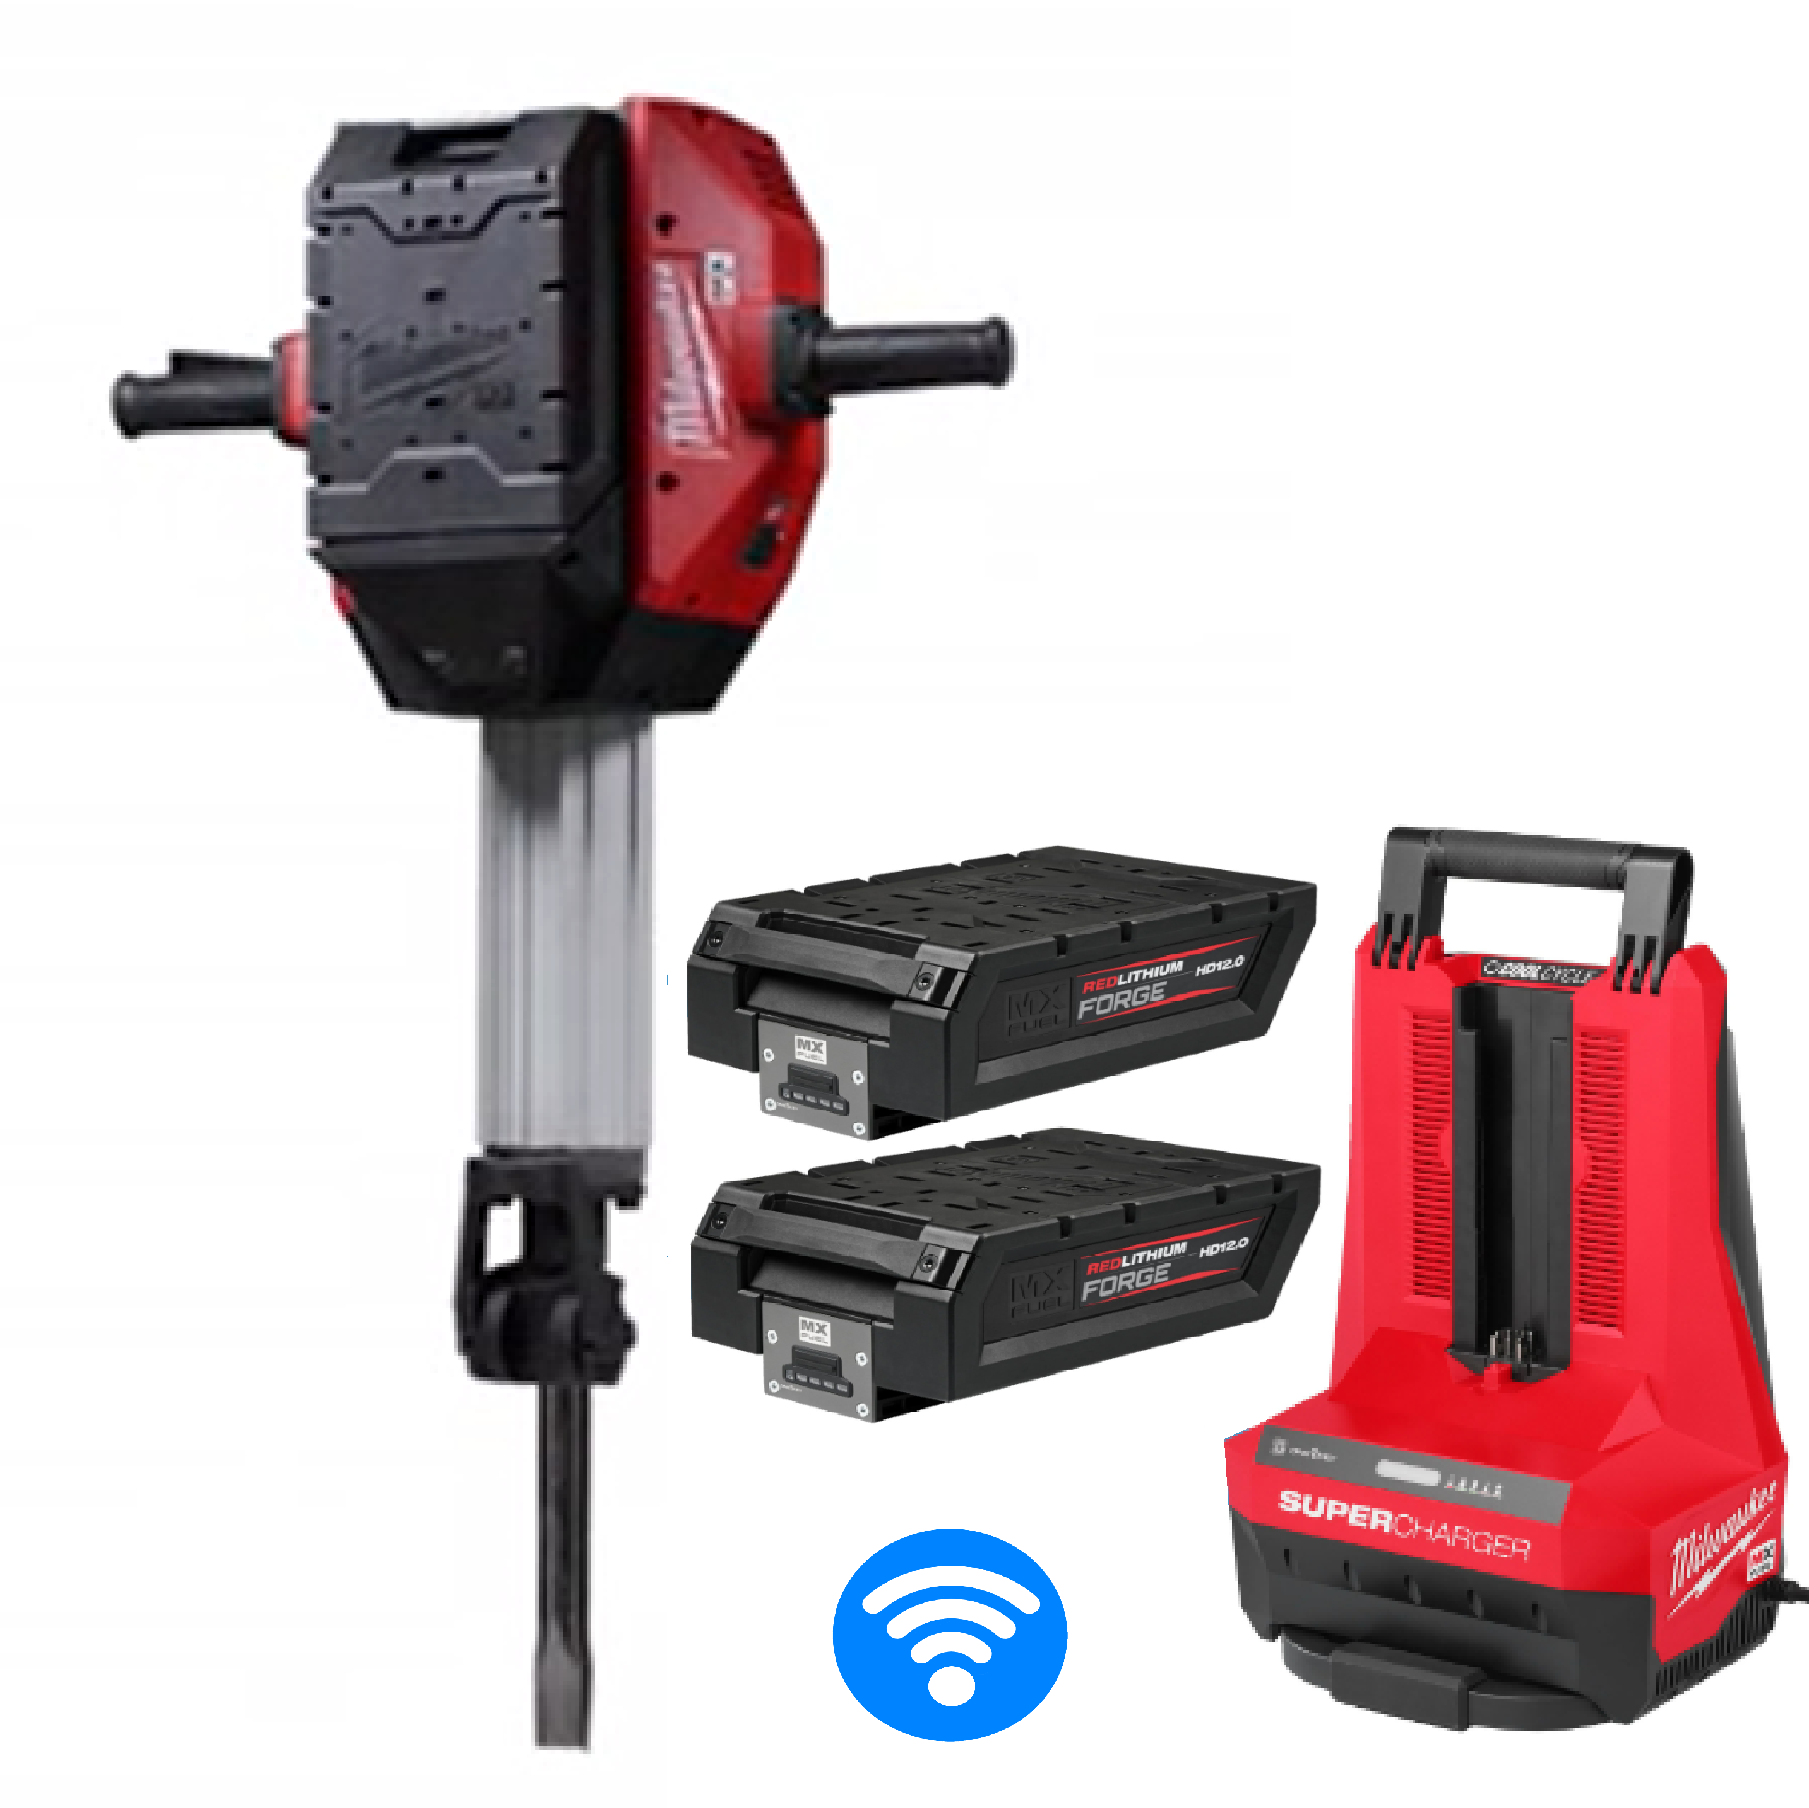 MILWAUKEE HD812 Battery Kit 2 X 12.0AH With FUEL SUPERCHARGER MXF-5C With MXF-DH2528H 28MM HEX BREAKER Demolition Hammer